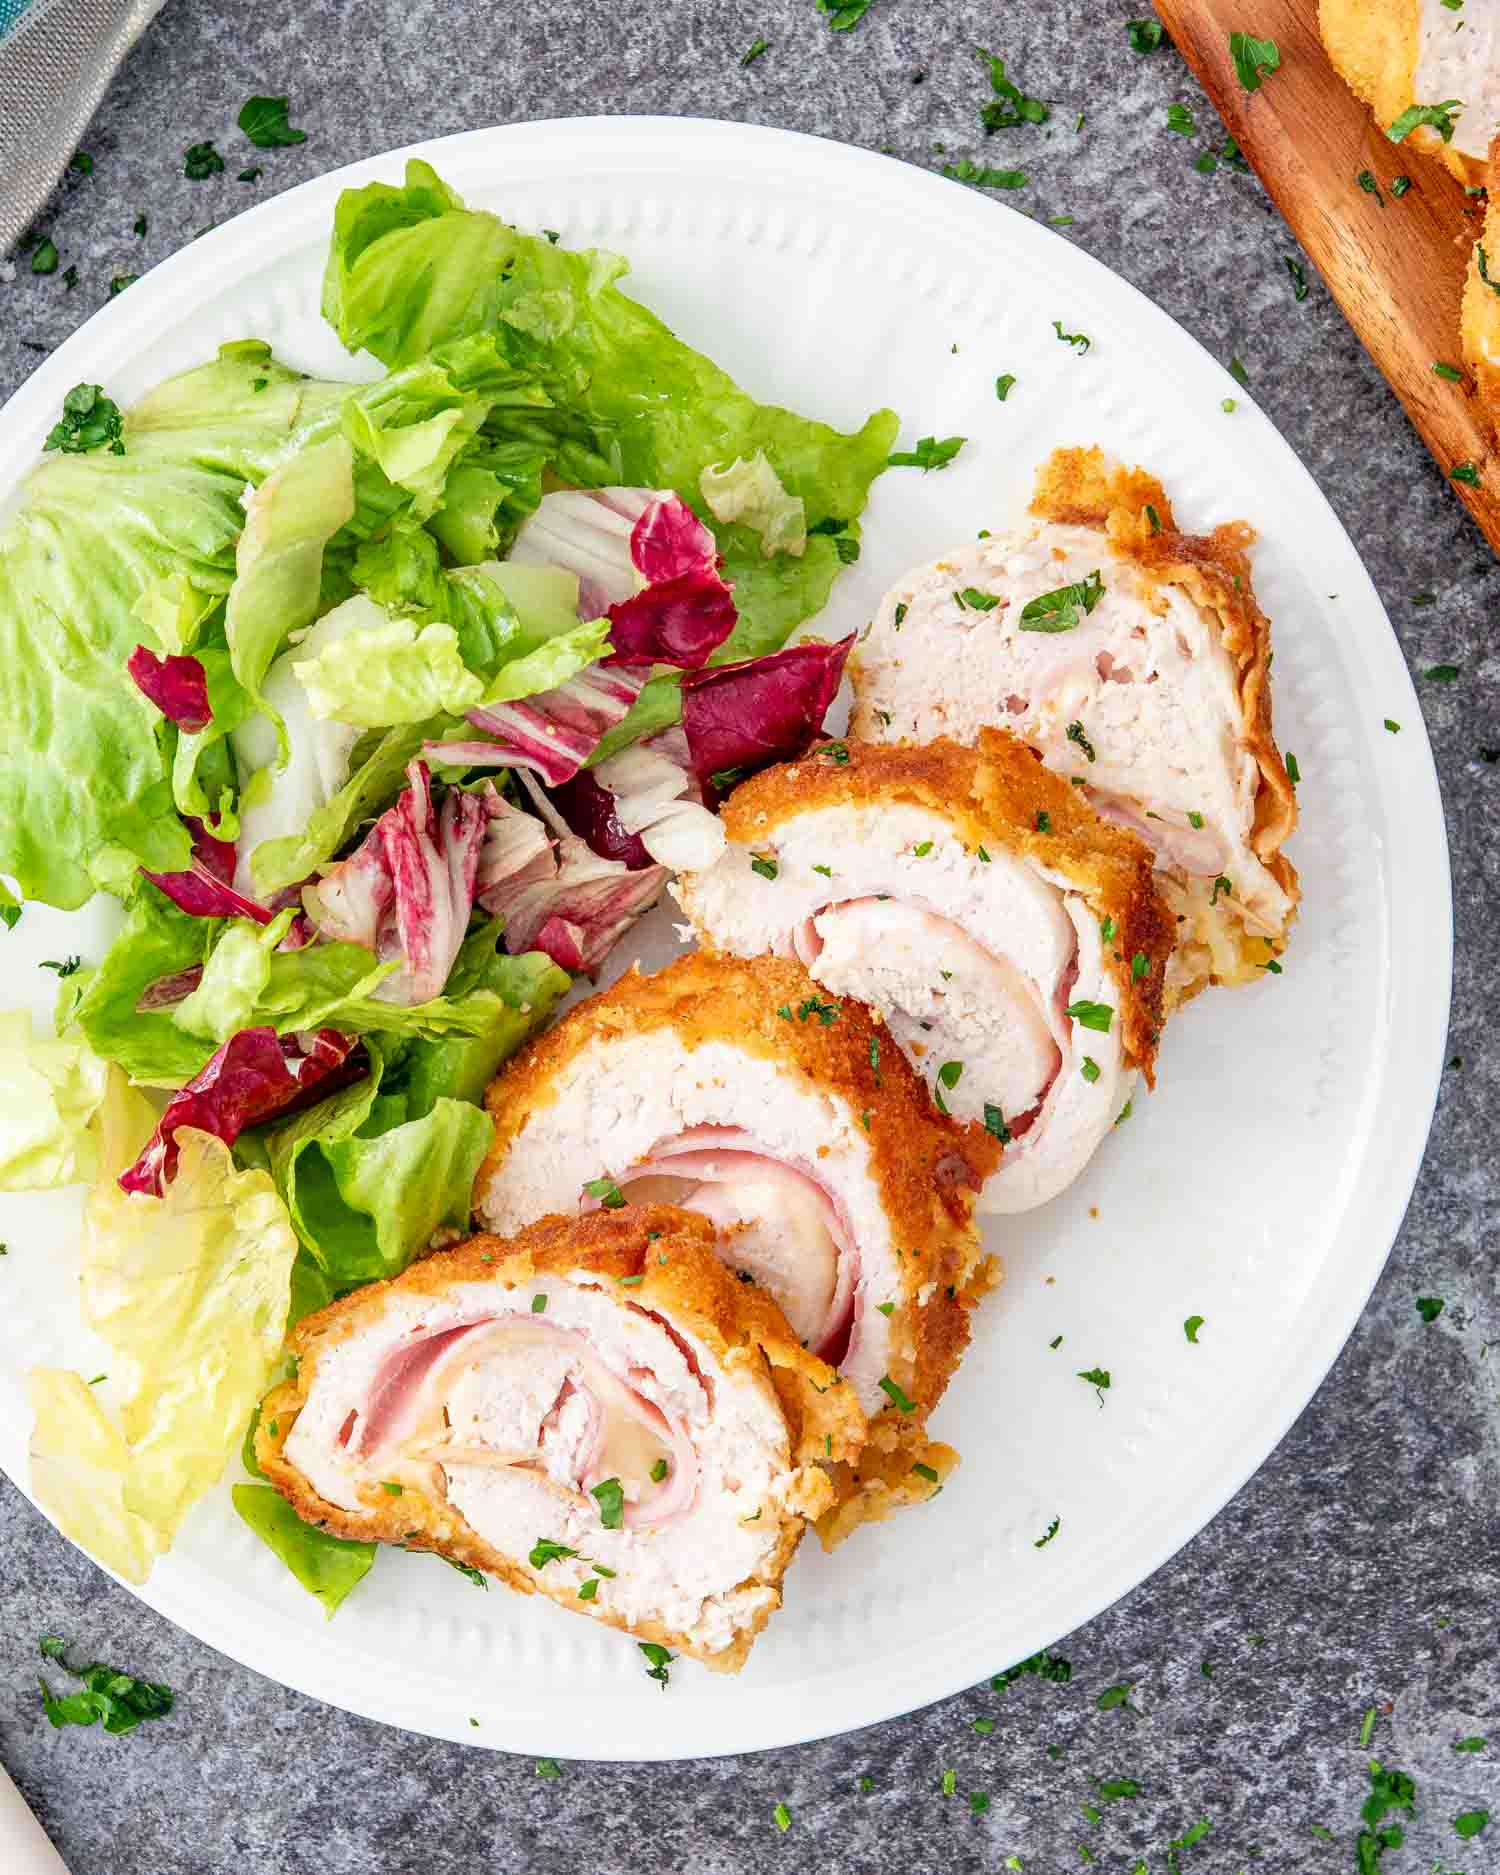 a piece of chicken cordon bleu all sliced up on a plate along a tossed salad.